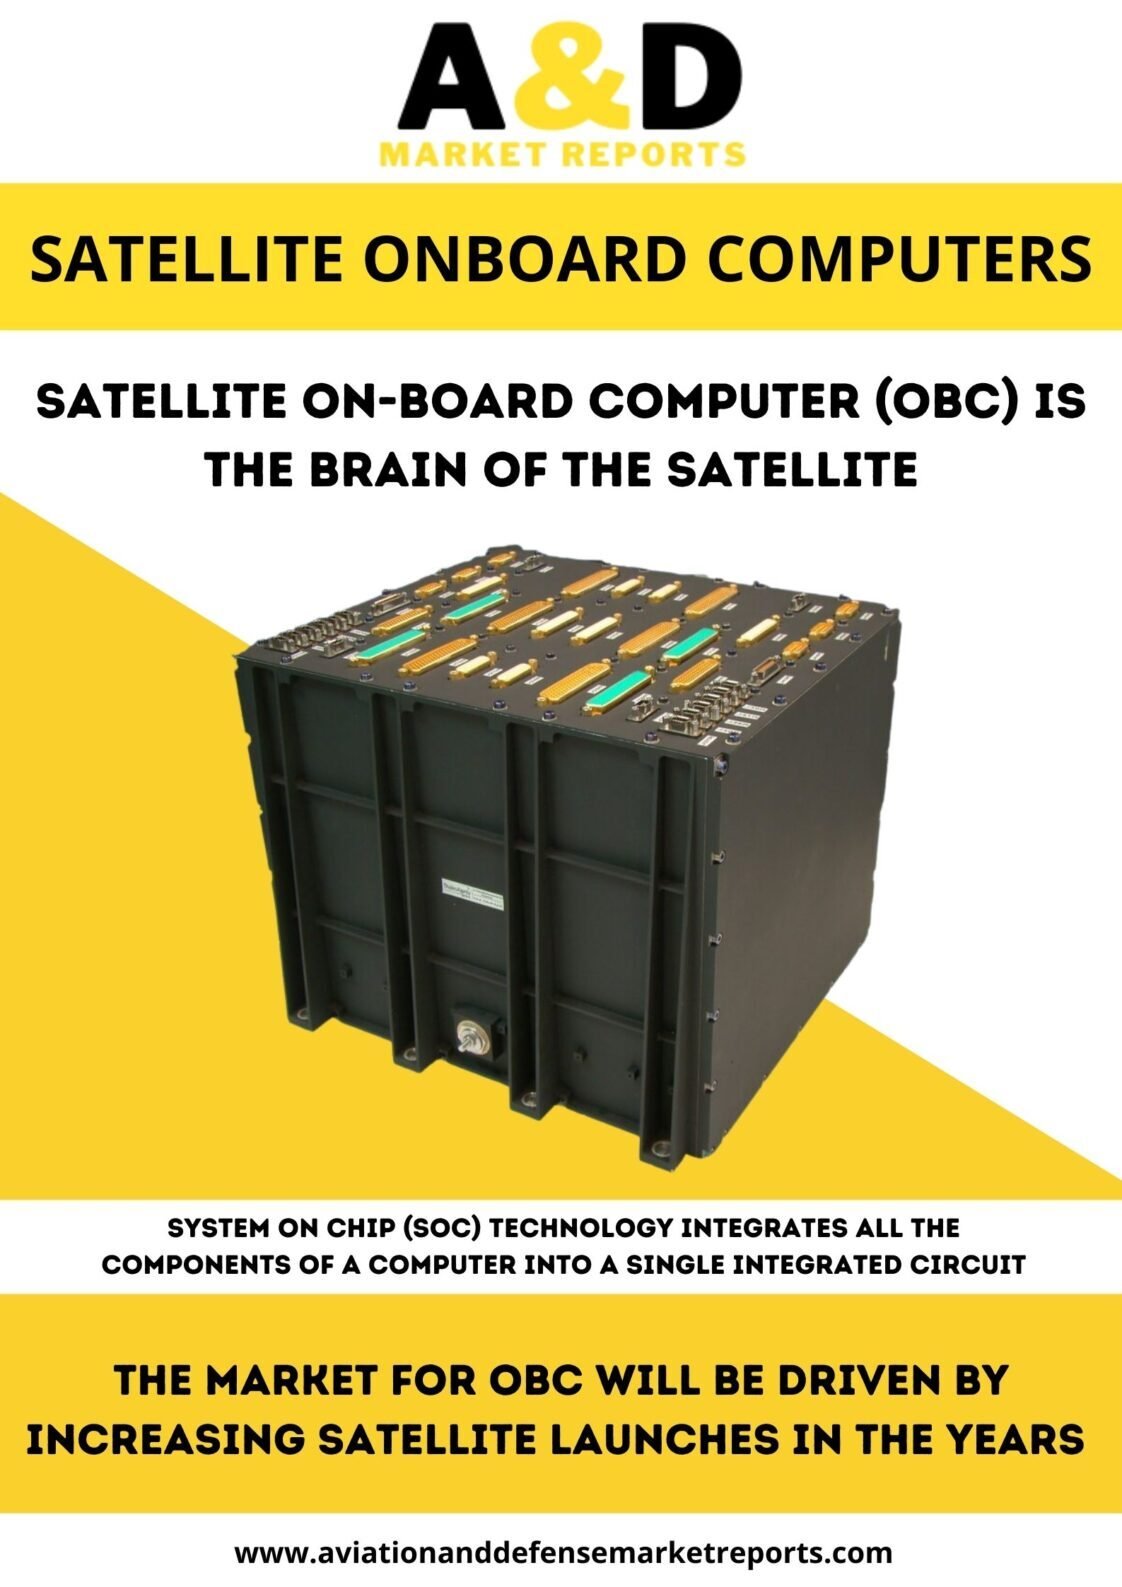 Growth Drivers of Satellite Onboard Computers